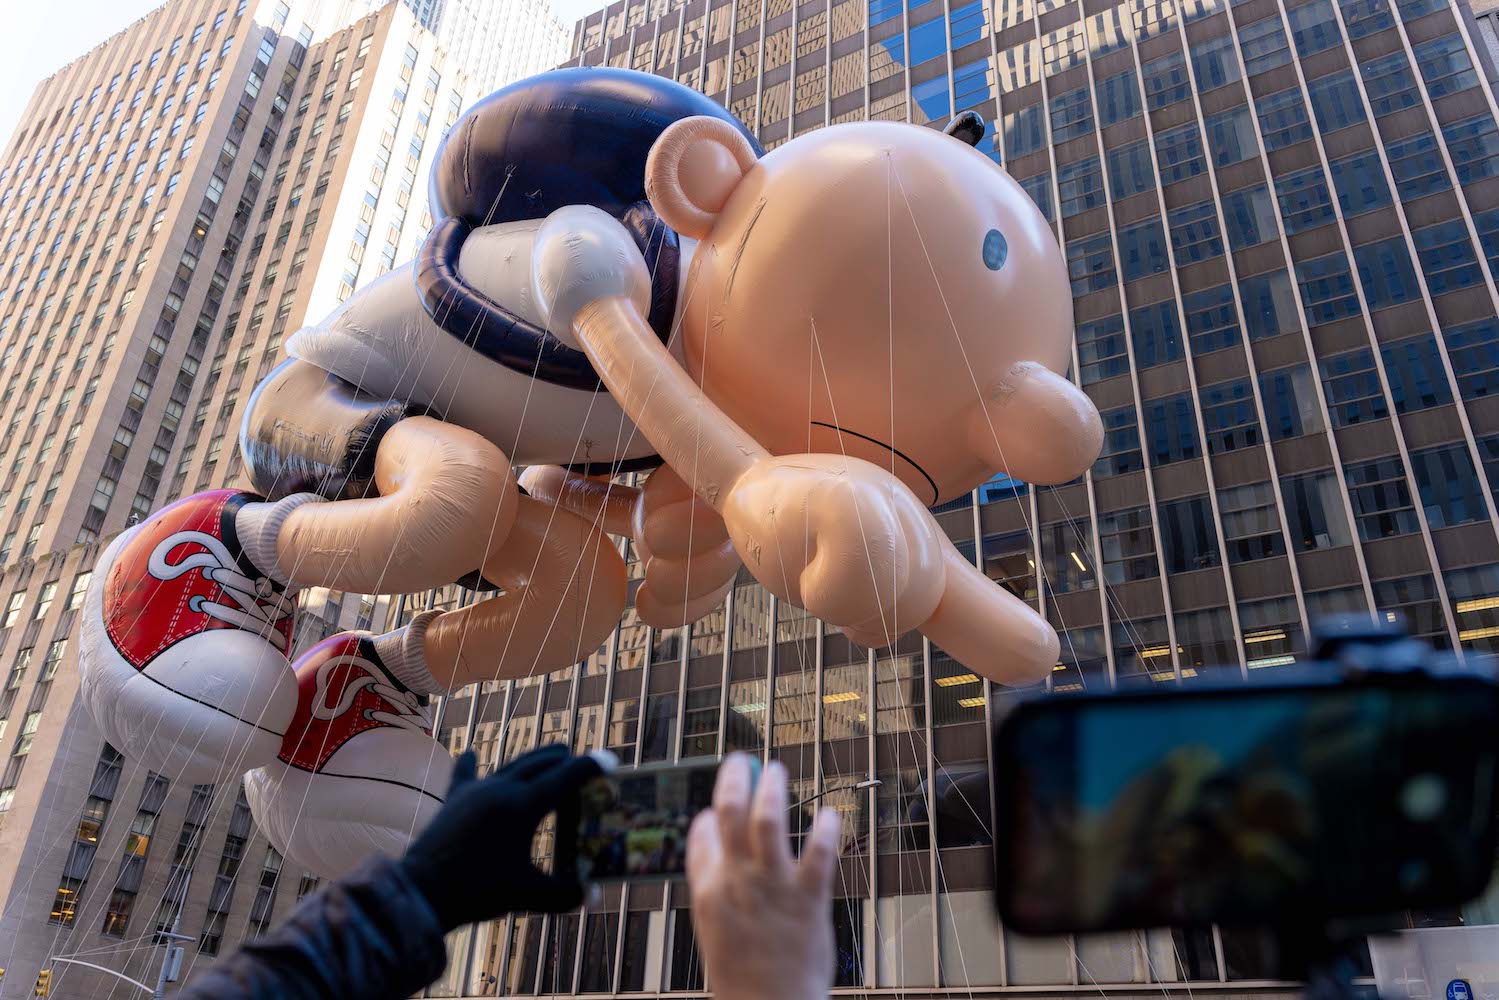 A large balloon of Greg Heffley from Diary Of a Wimpy Kid. He is a young school boy dressed in a white t-shirt, black shorts, and red and white sneakers wearing a black backpack.